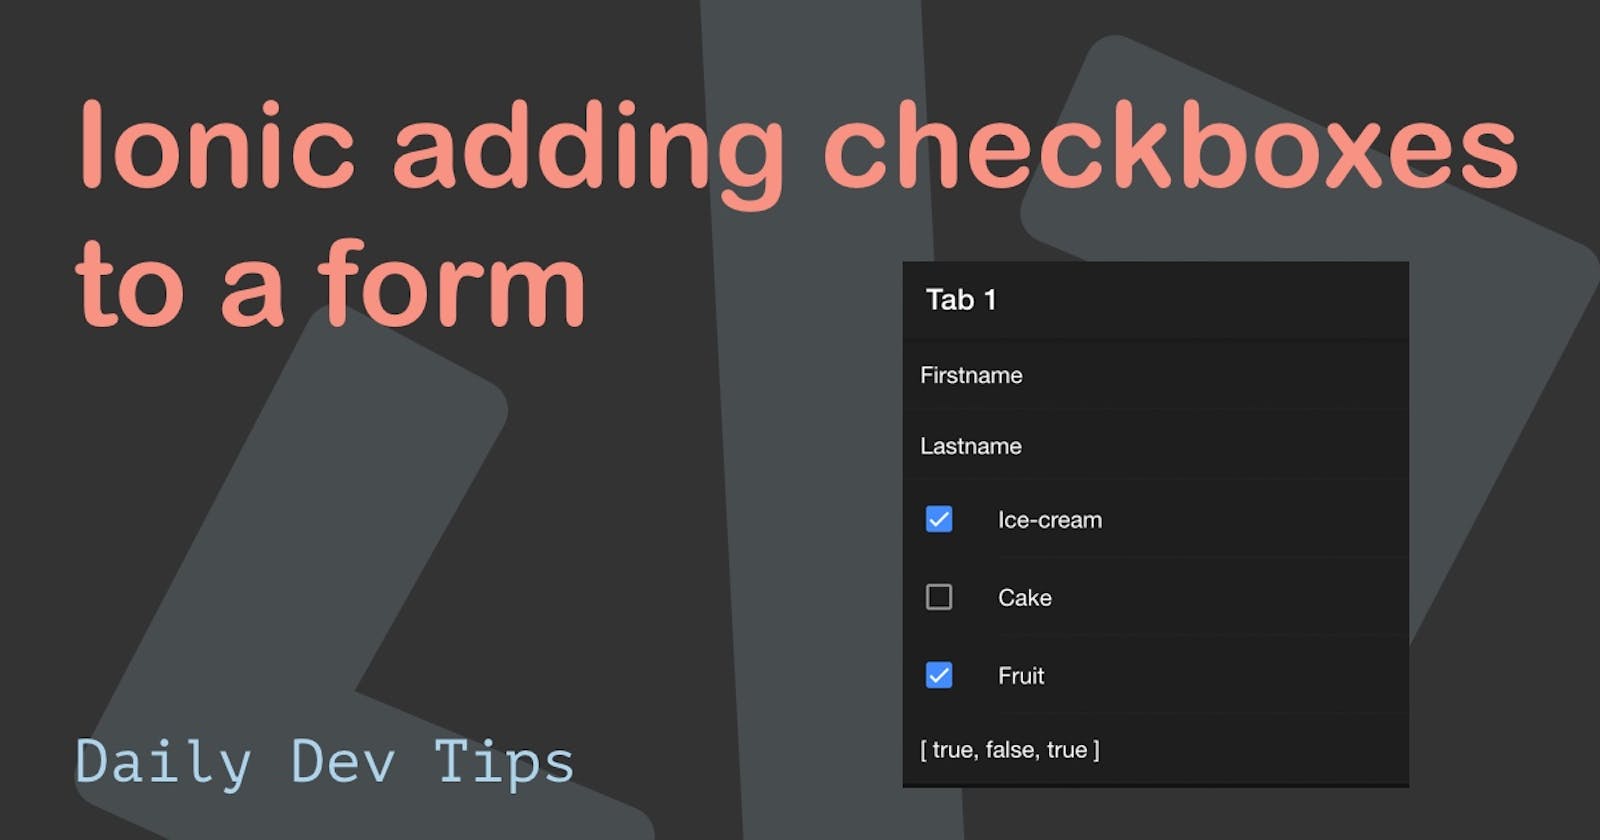 Ionic adding checkboxes to a form